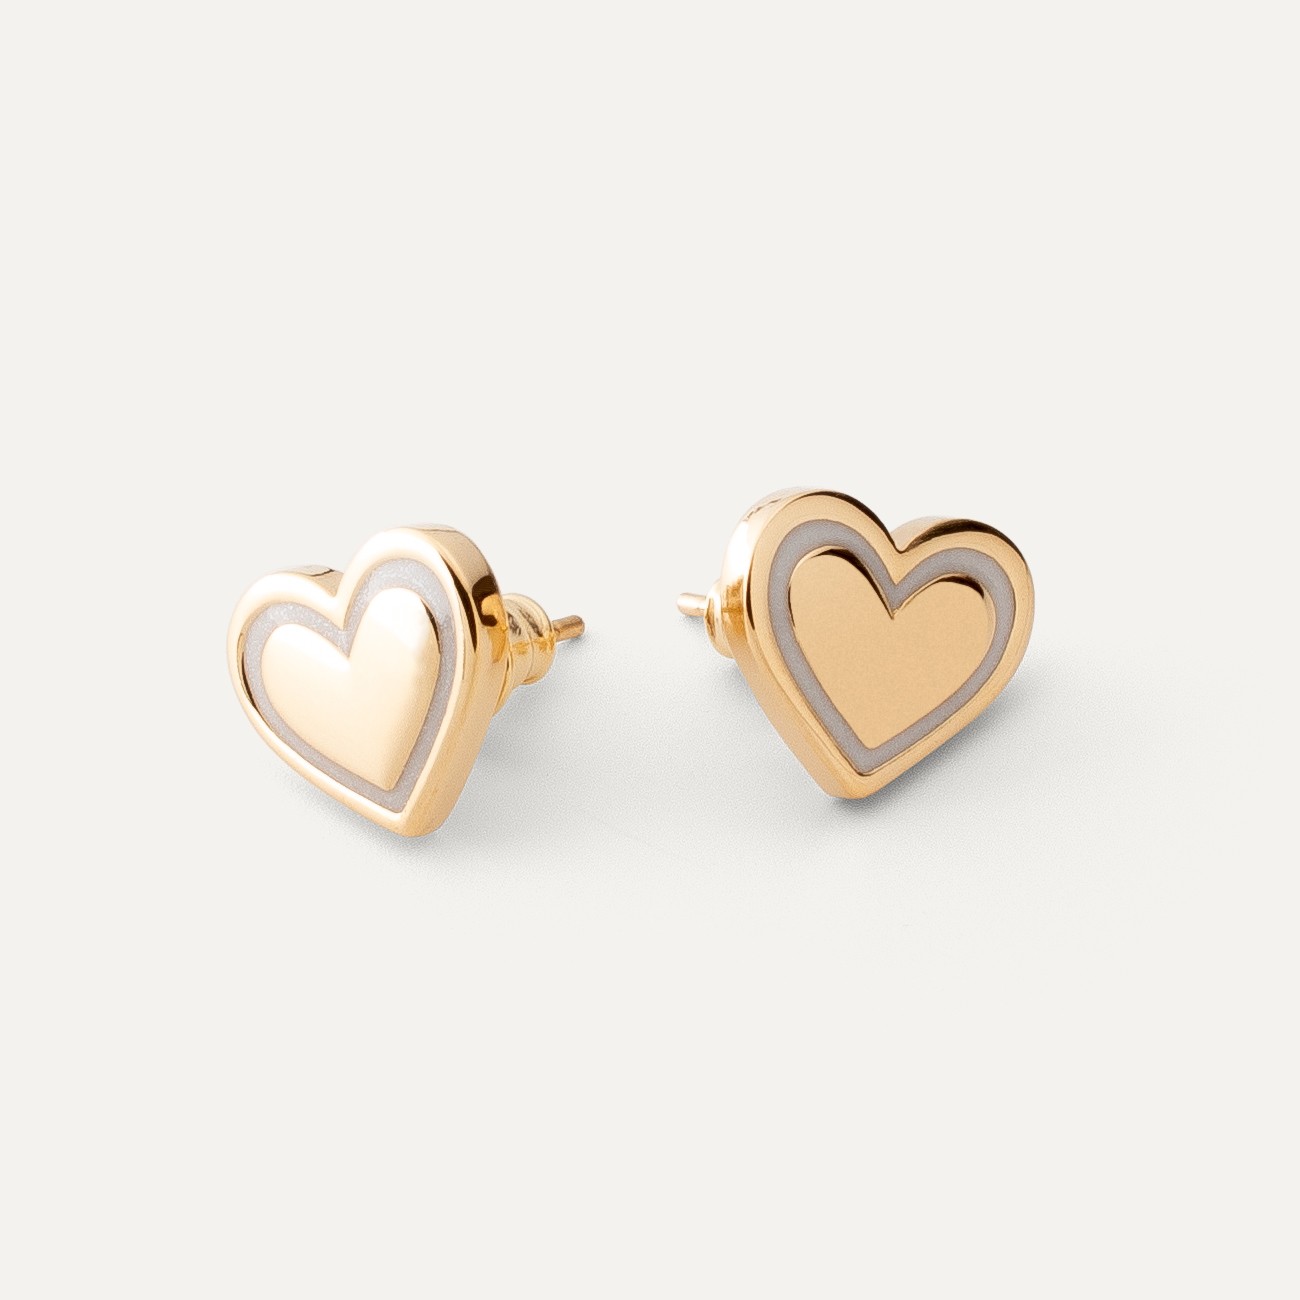 Heart earrings with white resin, sterling silver 925